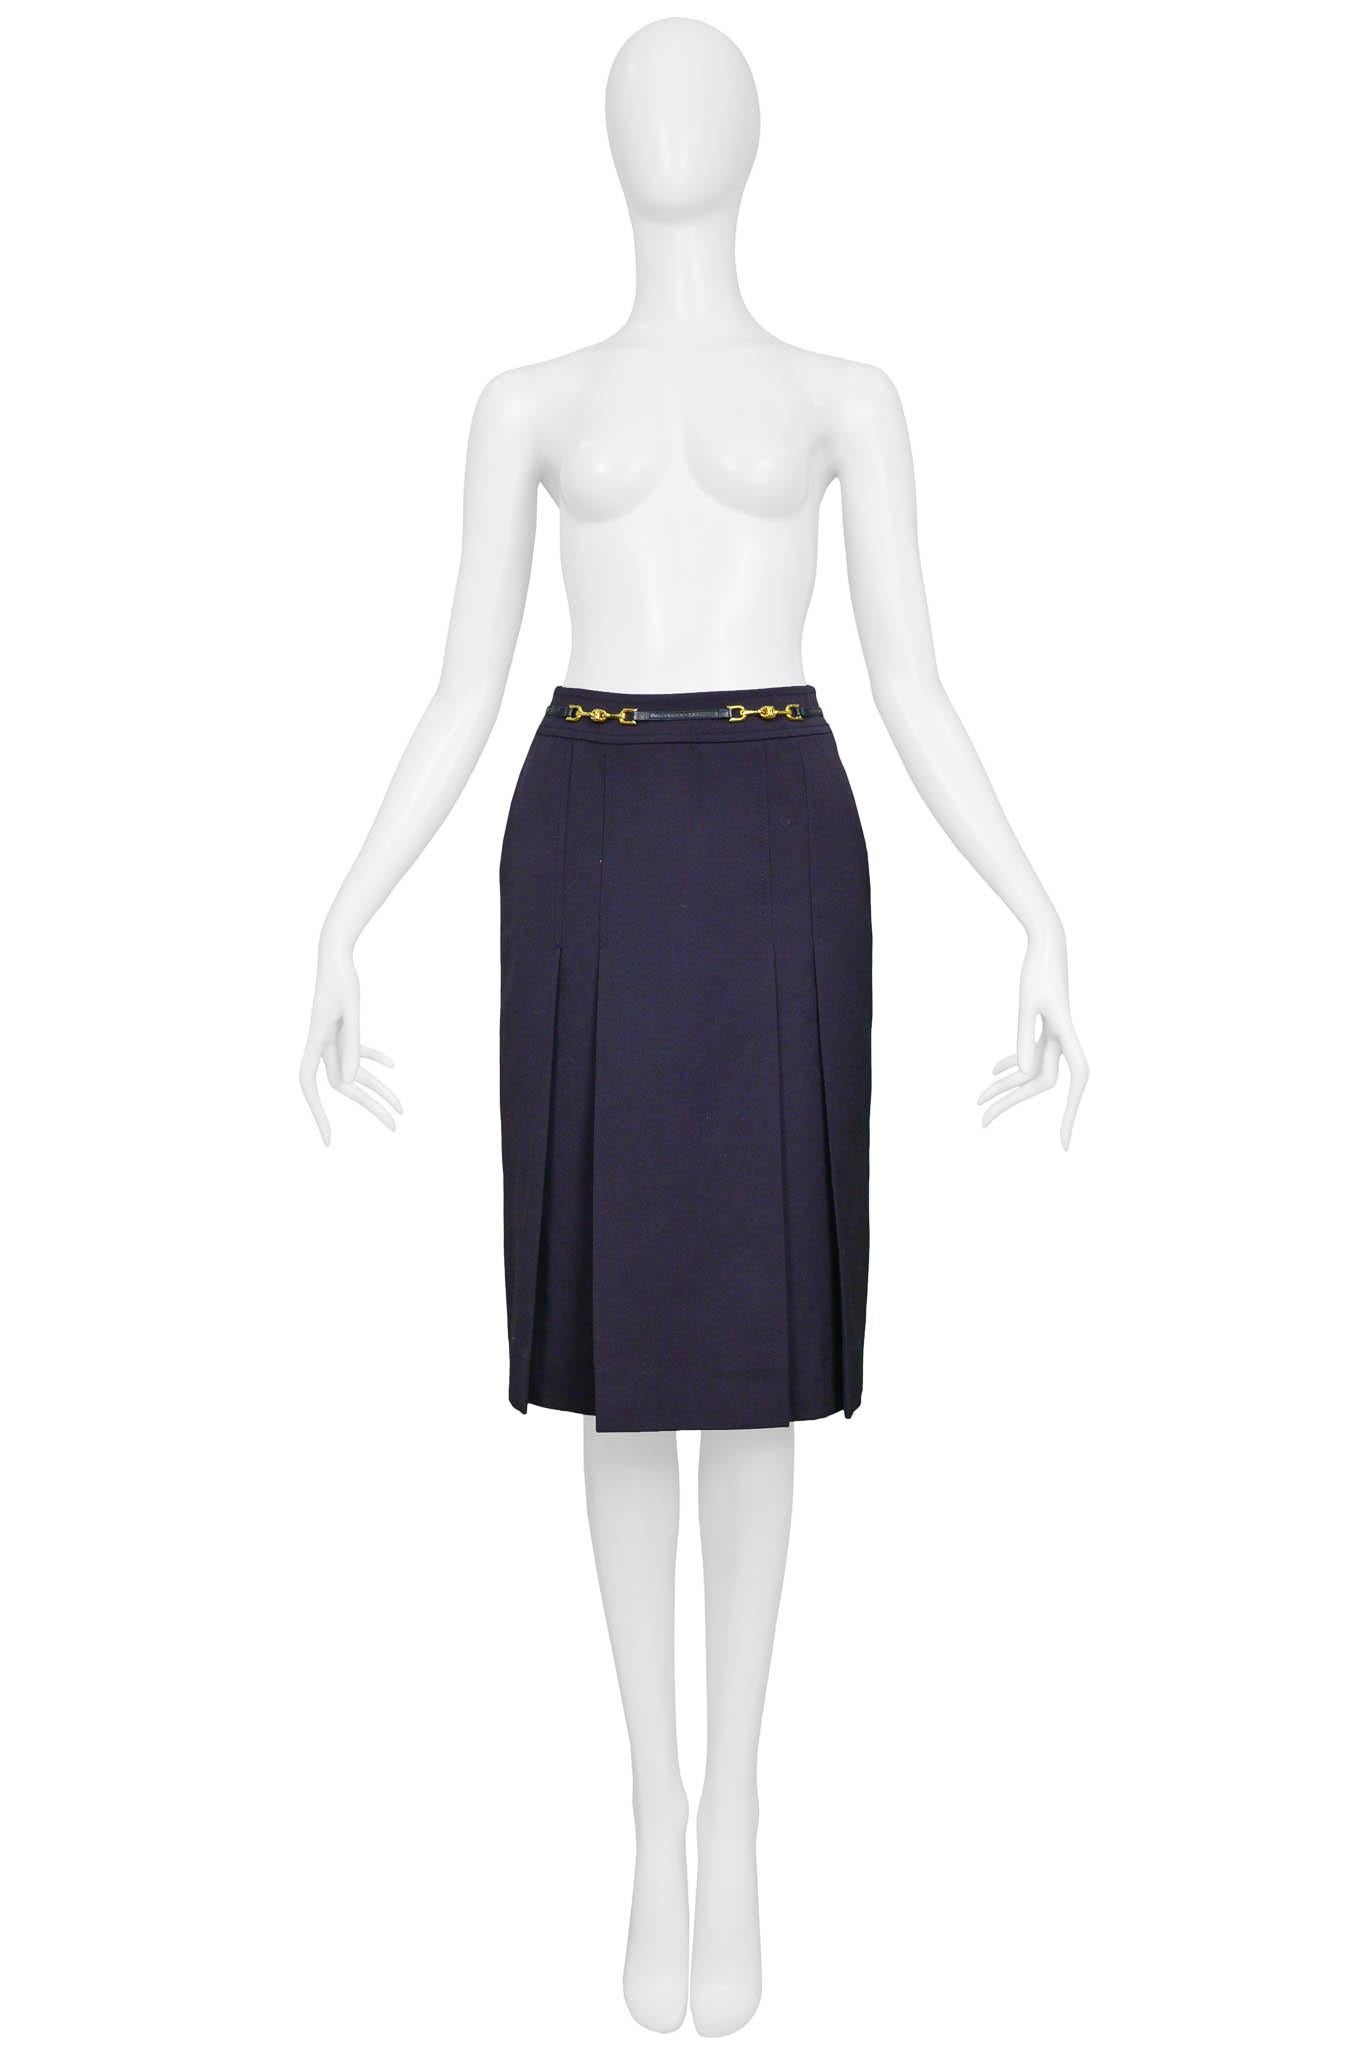 Resurrection Vintage is excited to offer a vintage navy purple Celine skirt featuring box pleats, a hidden zipper on the side back, and a thin black belt attached to the front waistband with gold links.

Celine, Paris
Size 36
100% Wool 
Excellent